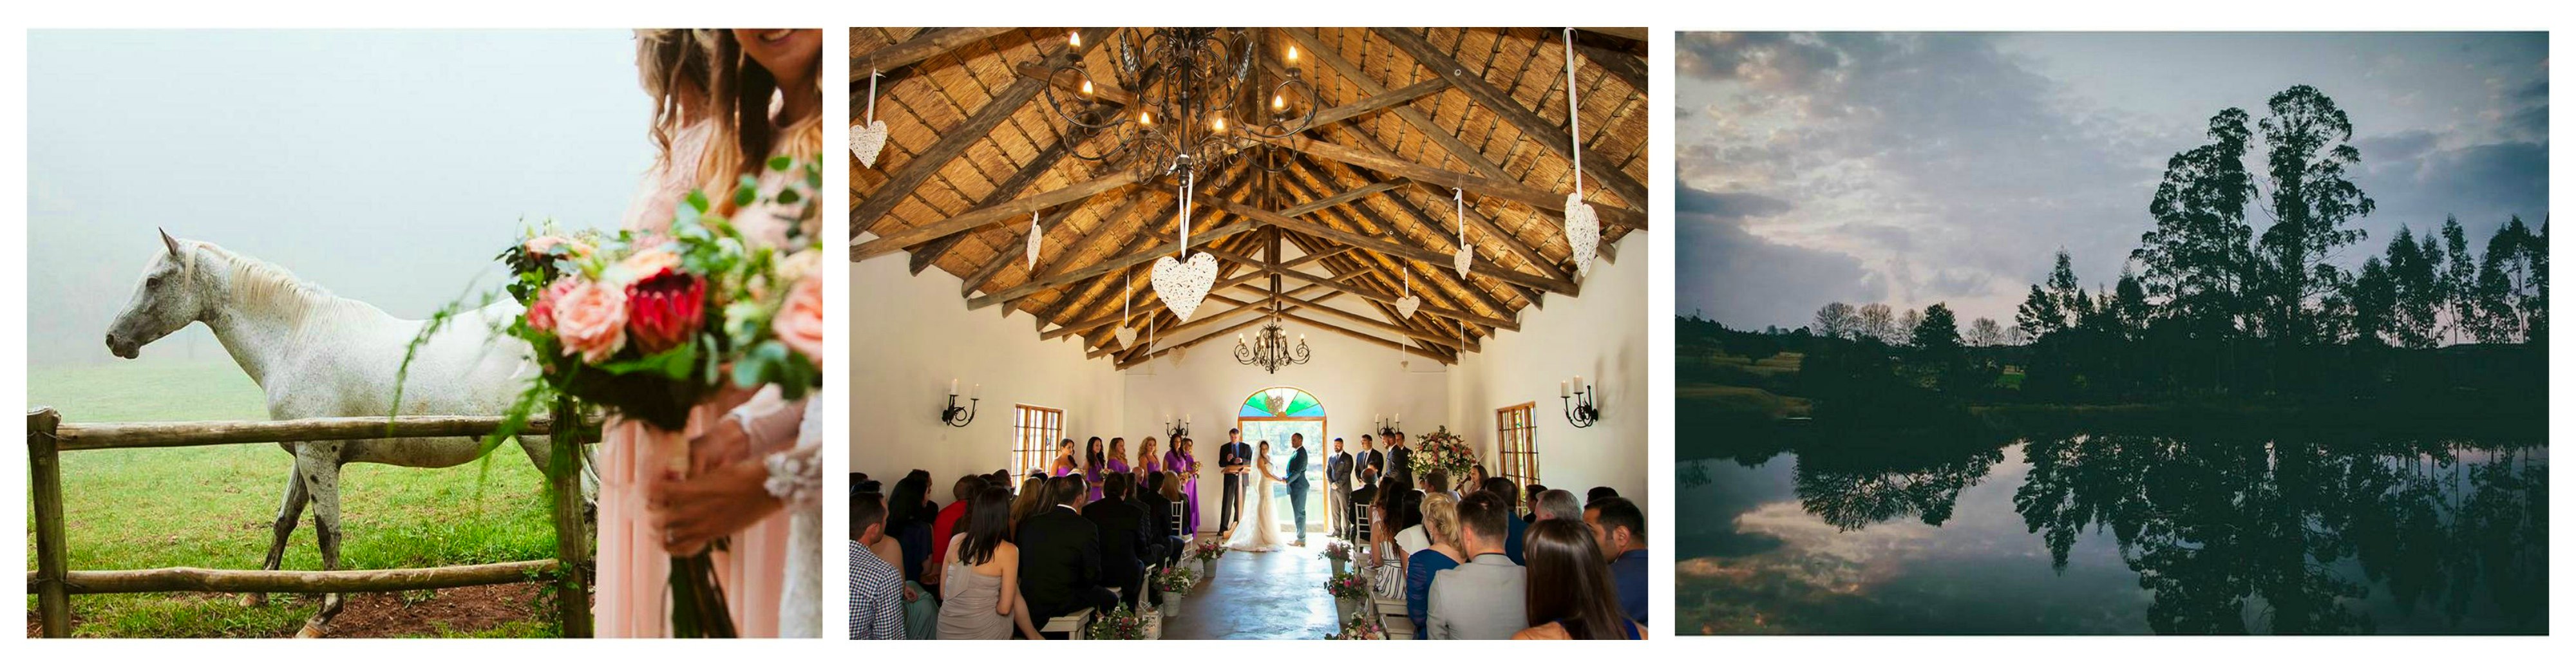 Cranford Country Lodge and Wedding Venue